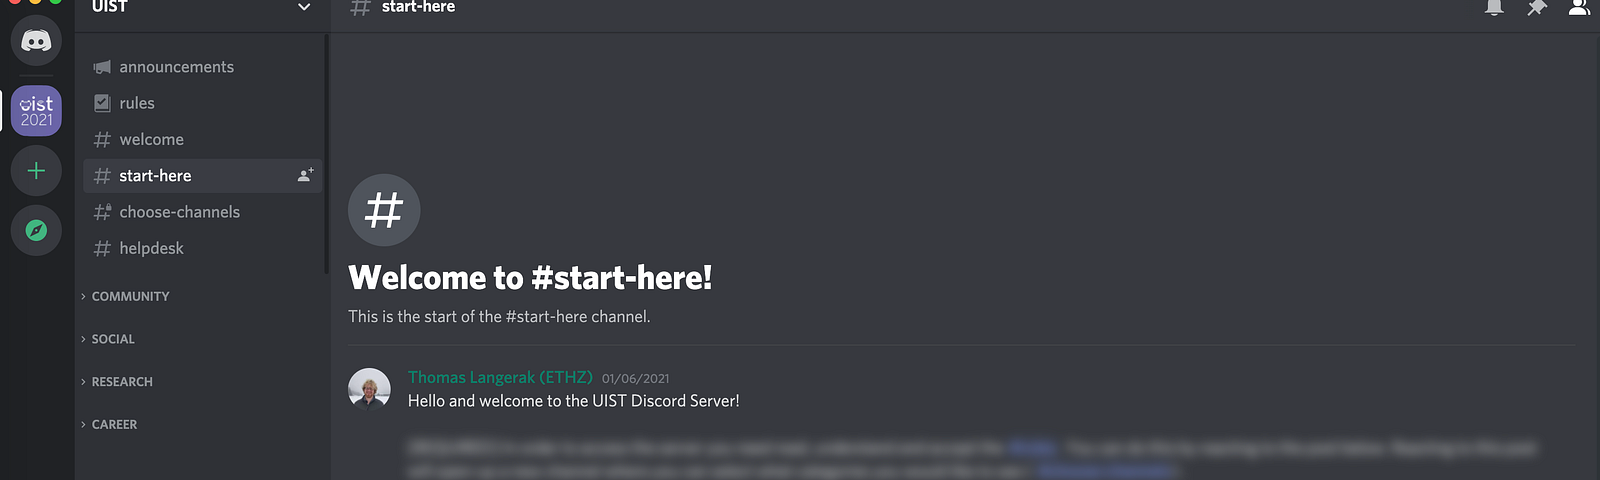 A screenshot of the #start-here channel on the UIST Discord server, with a brief welcome message.